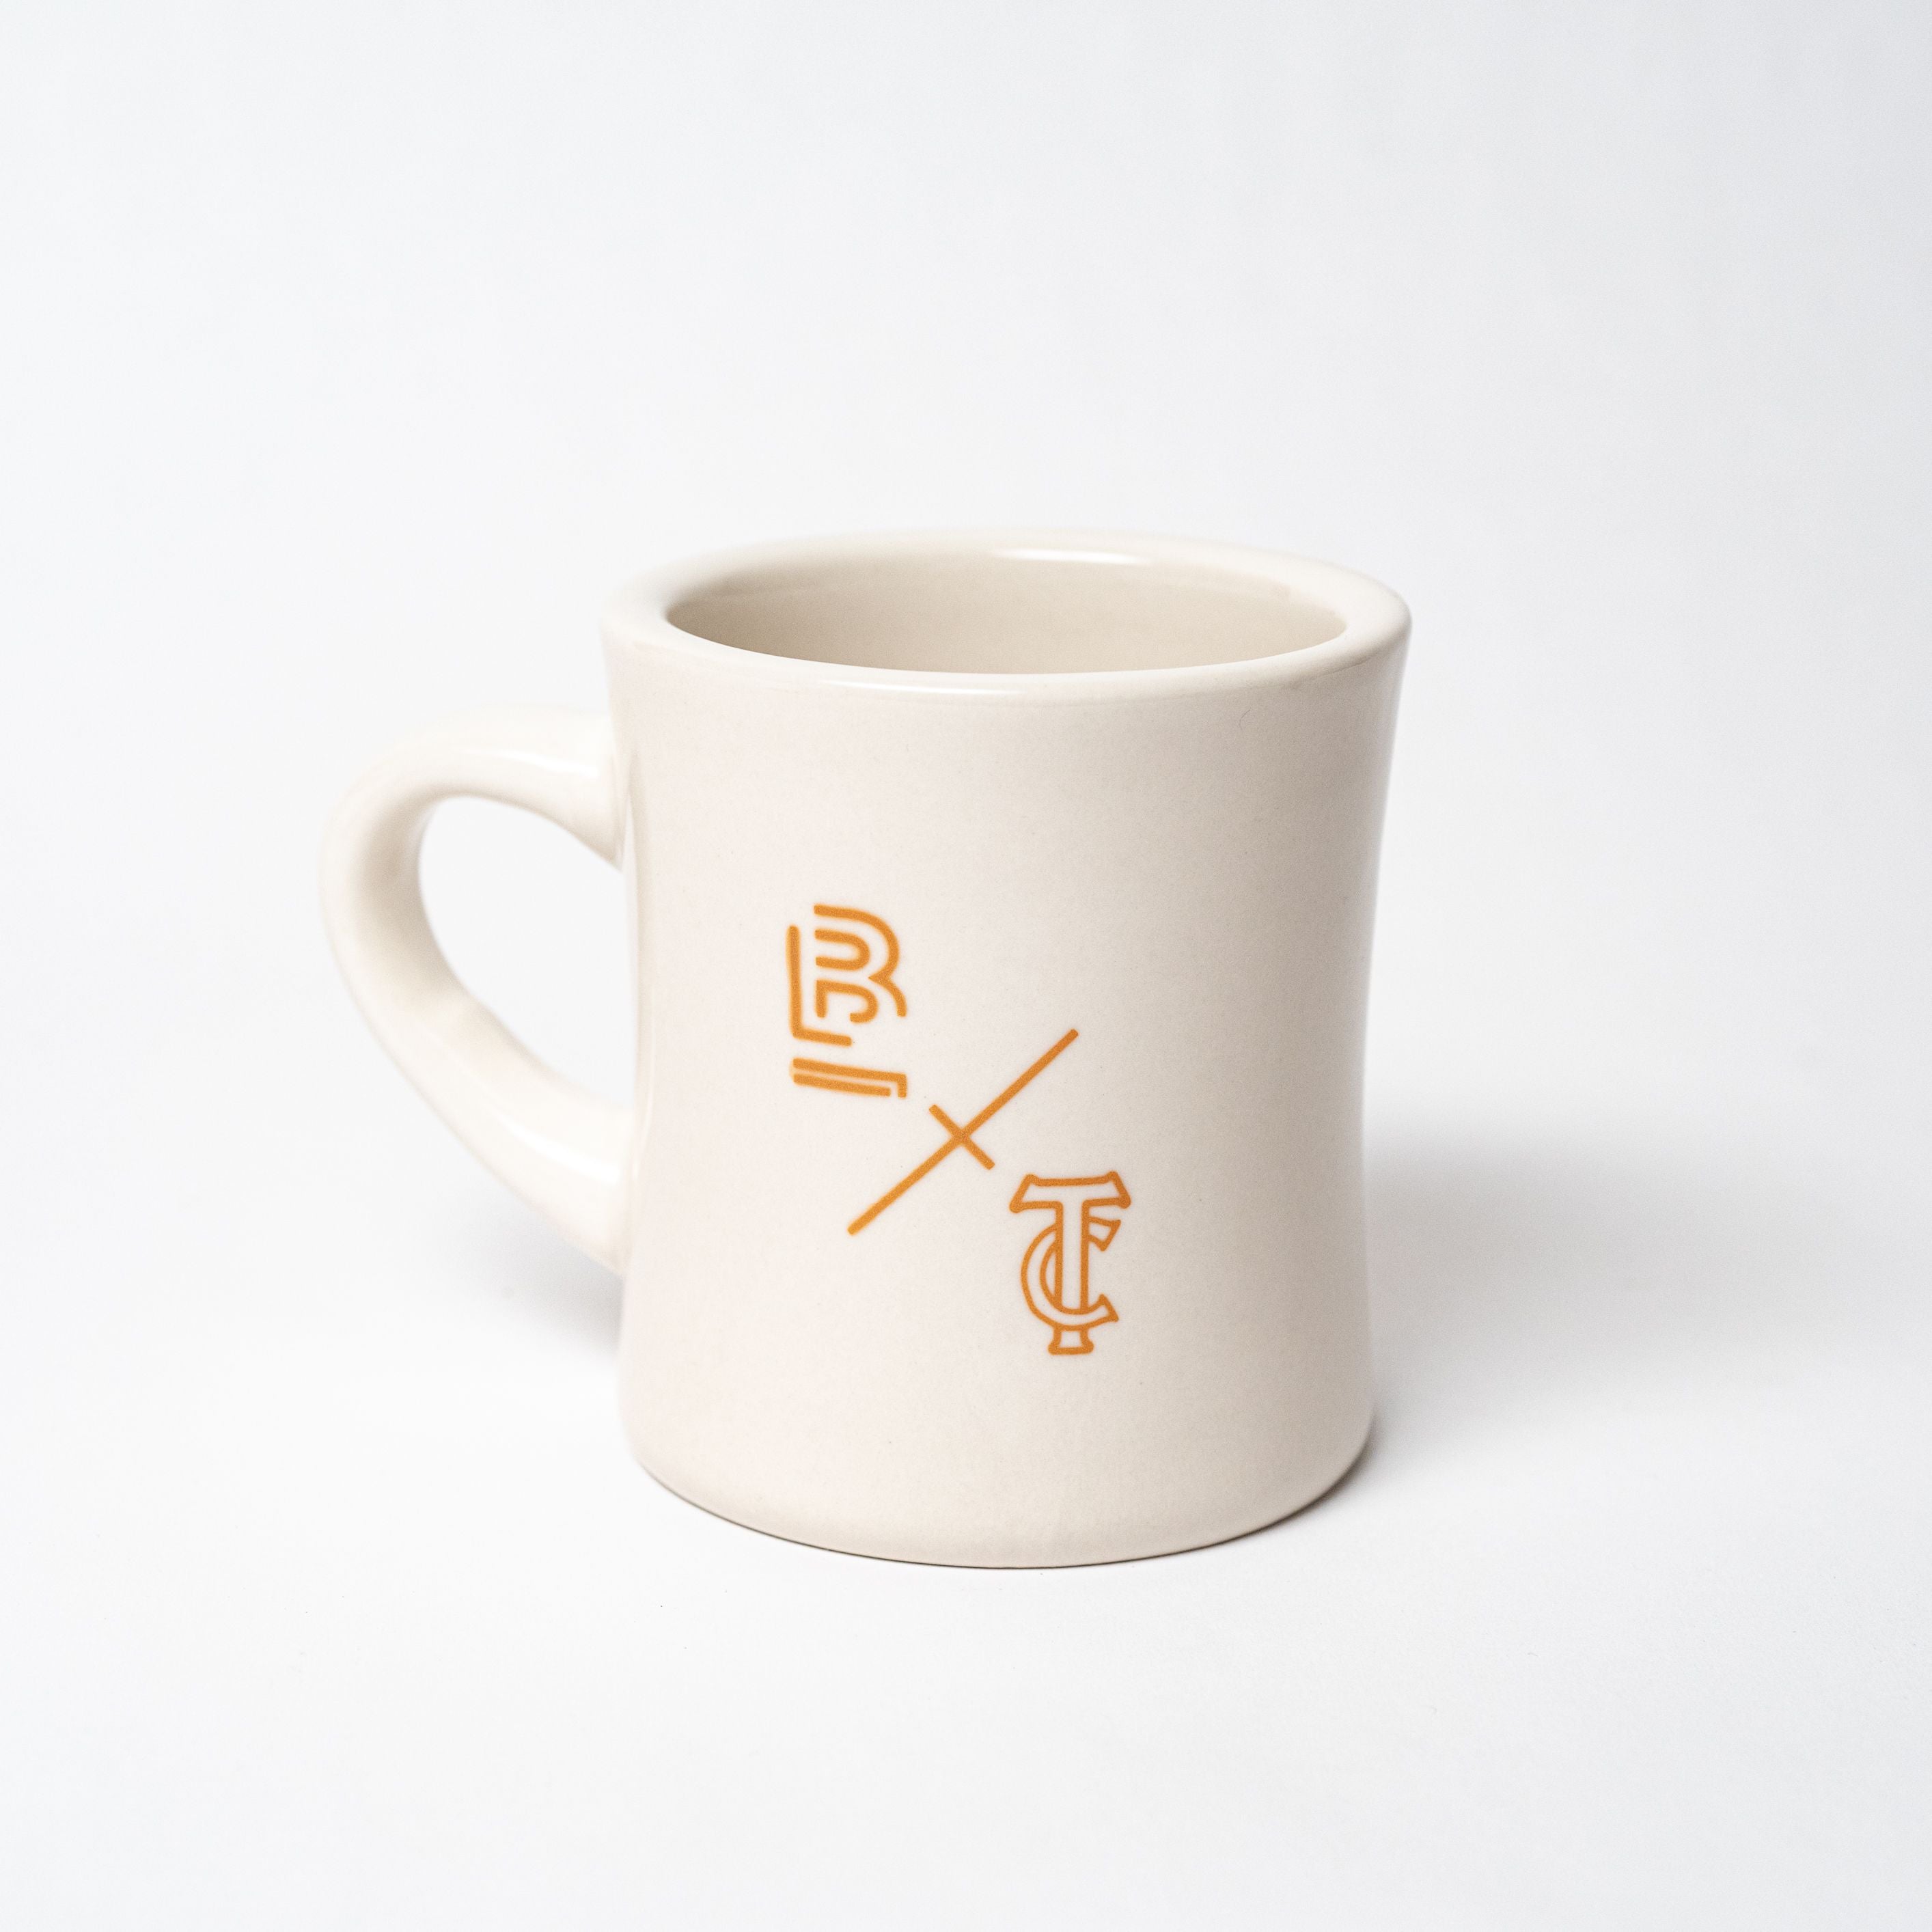 A white mug with an orange logo from Blackwing x Timeless Coffee Bundle.